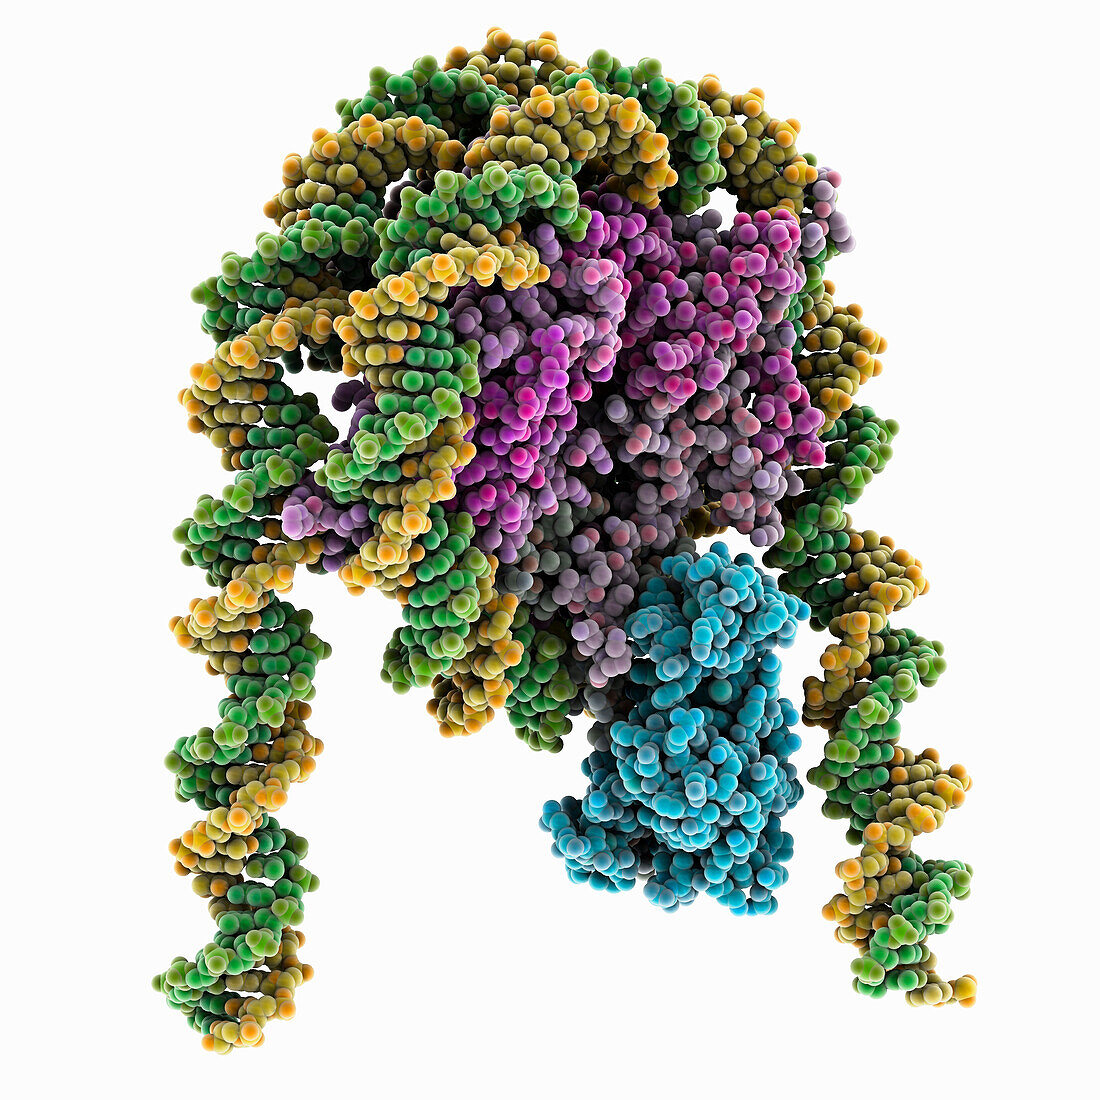 NSD2 mutant bound to nucleosome, molecular model